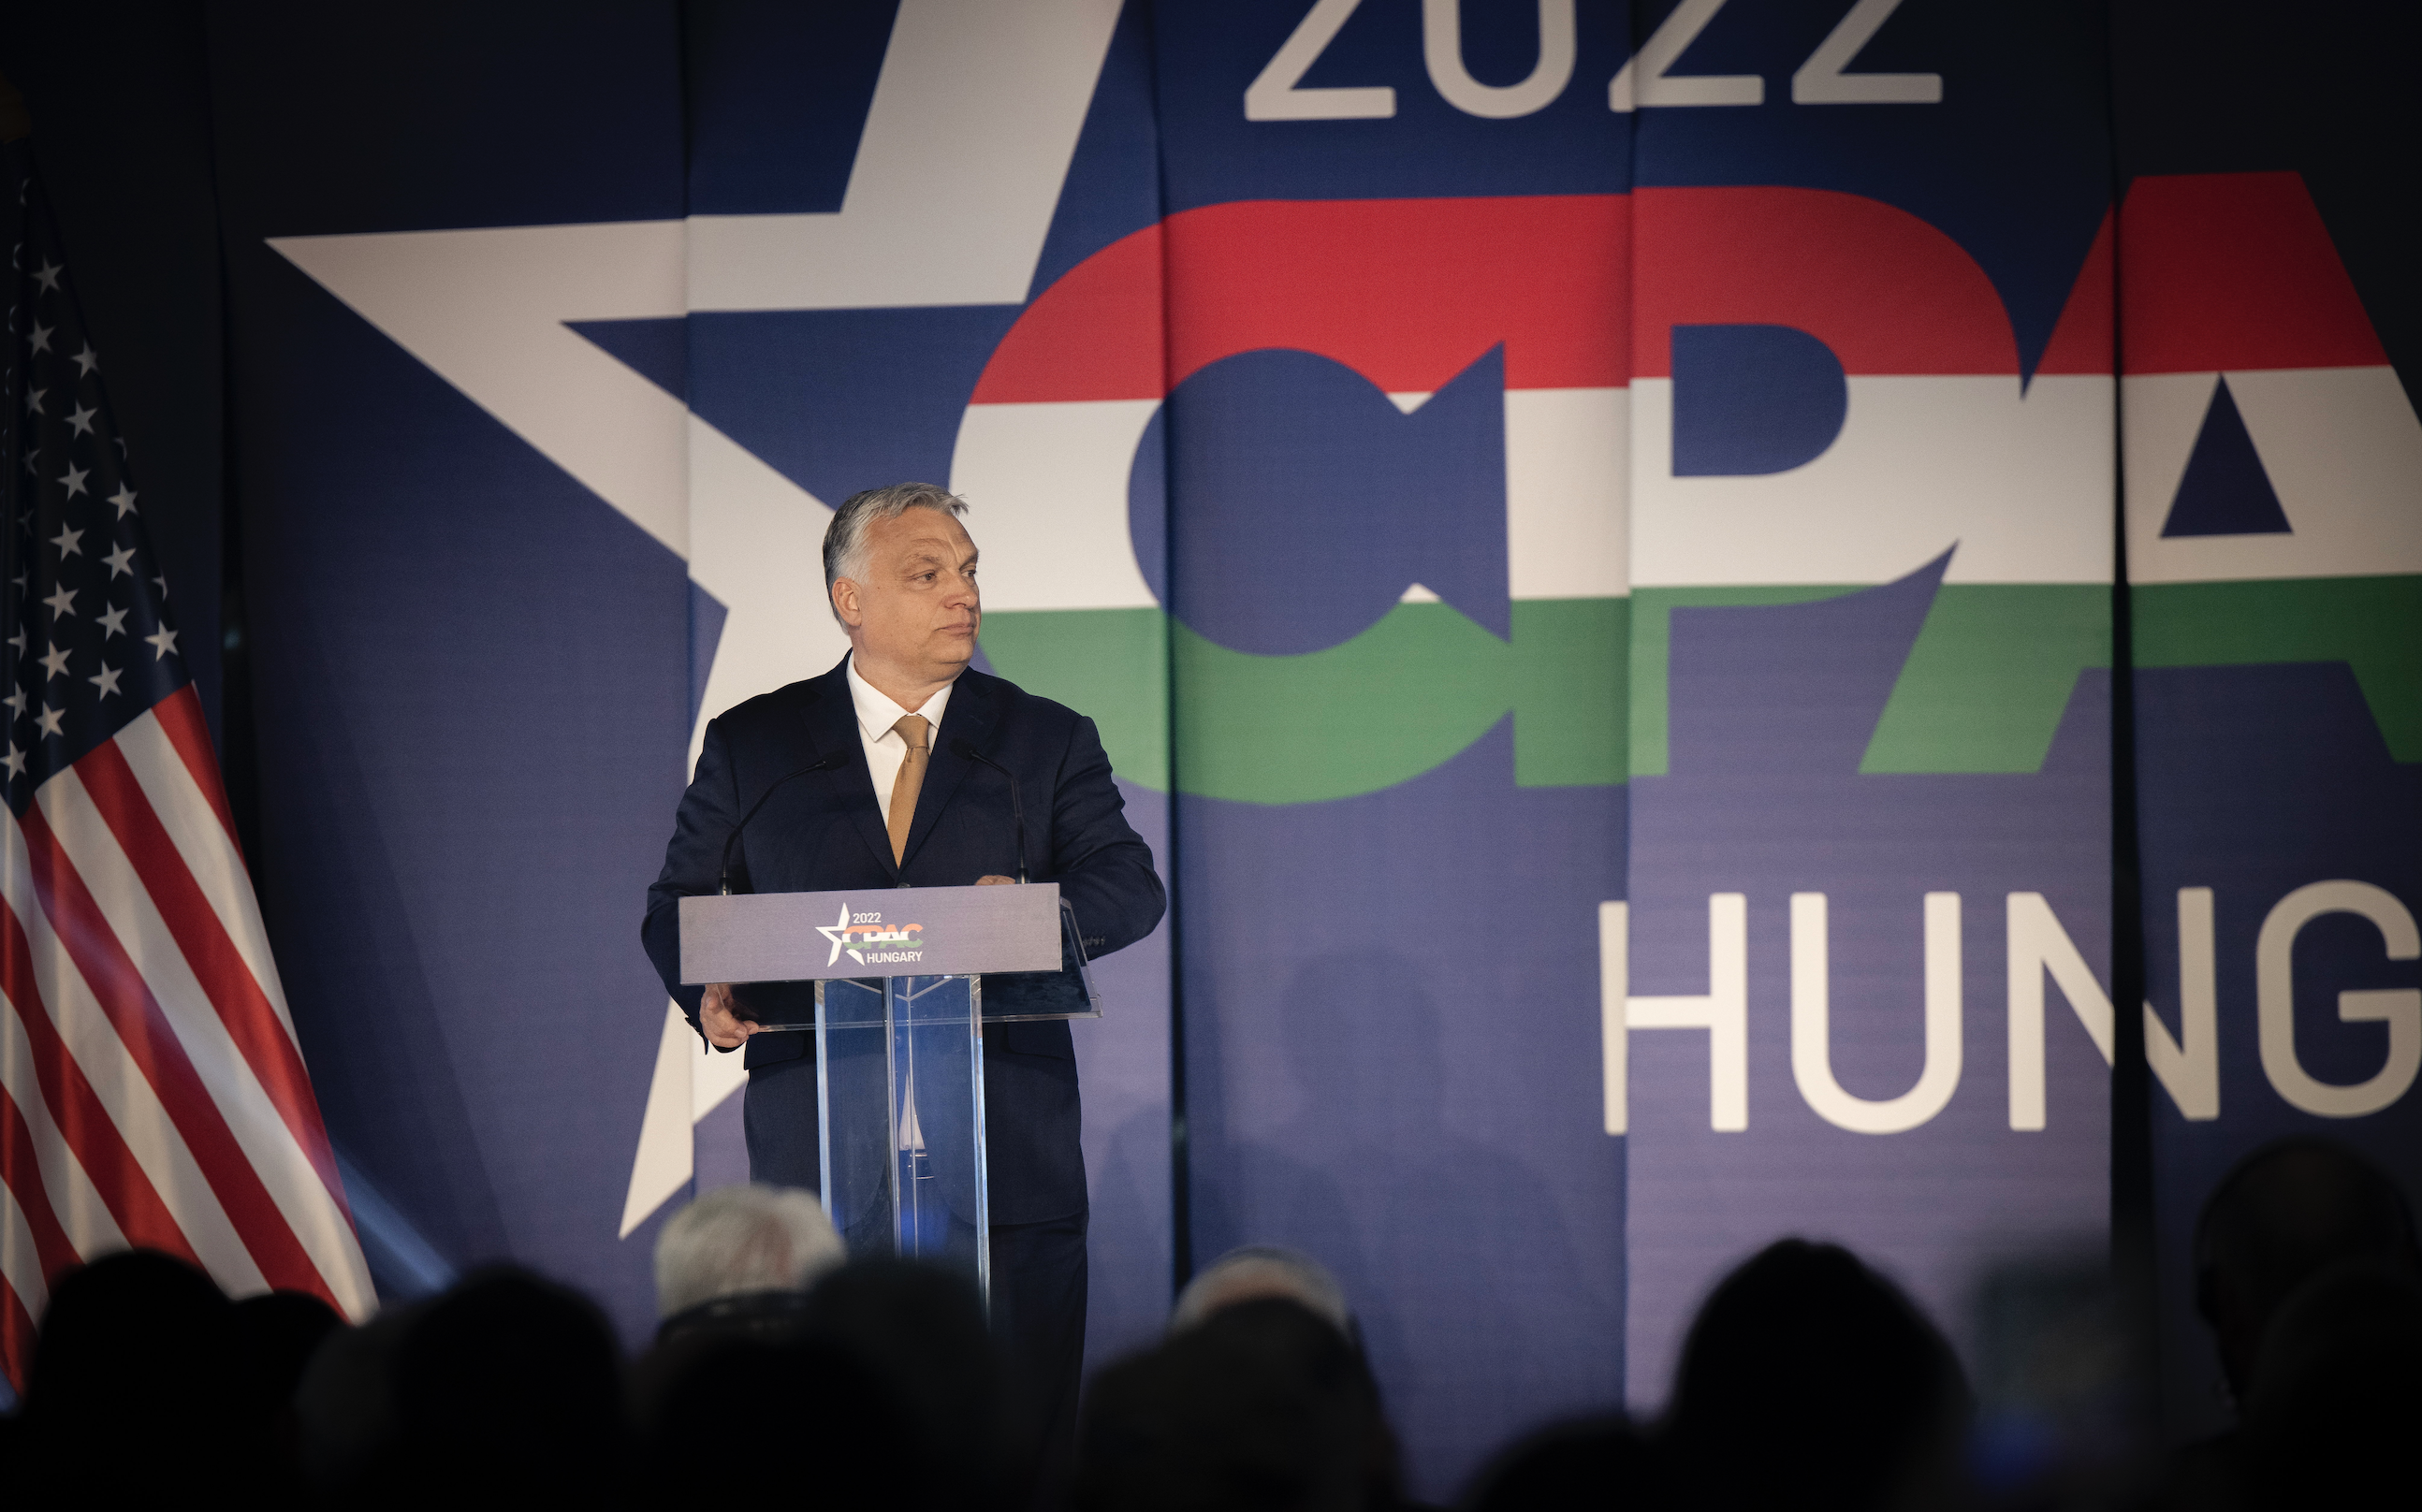 Orbán presents 12 points of advice for conservatives at CPAC